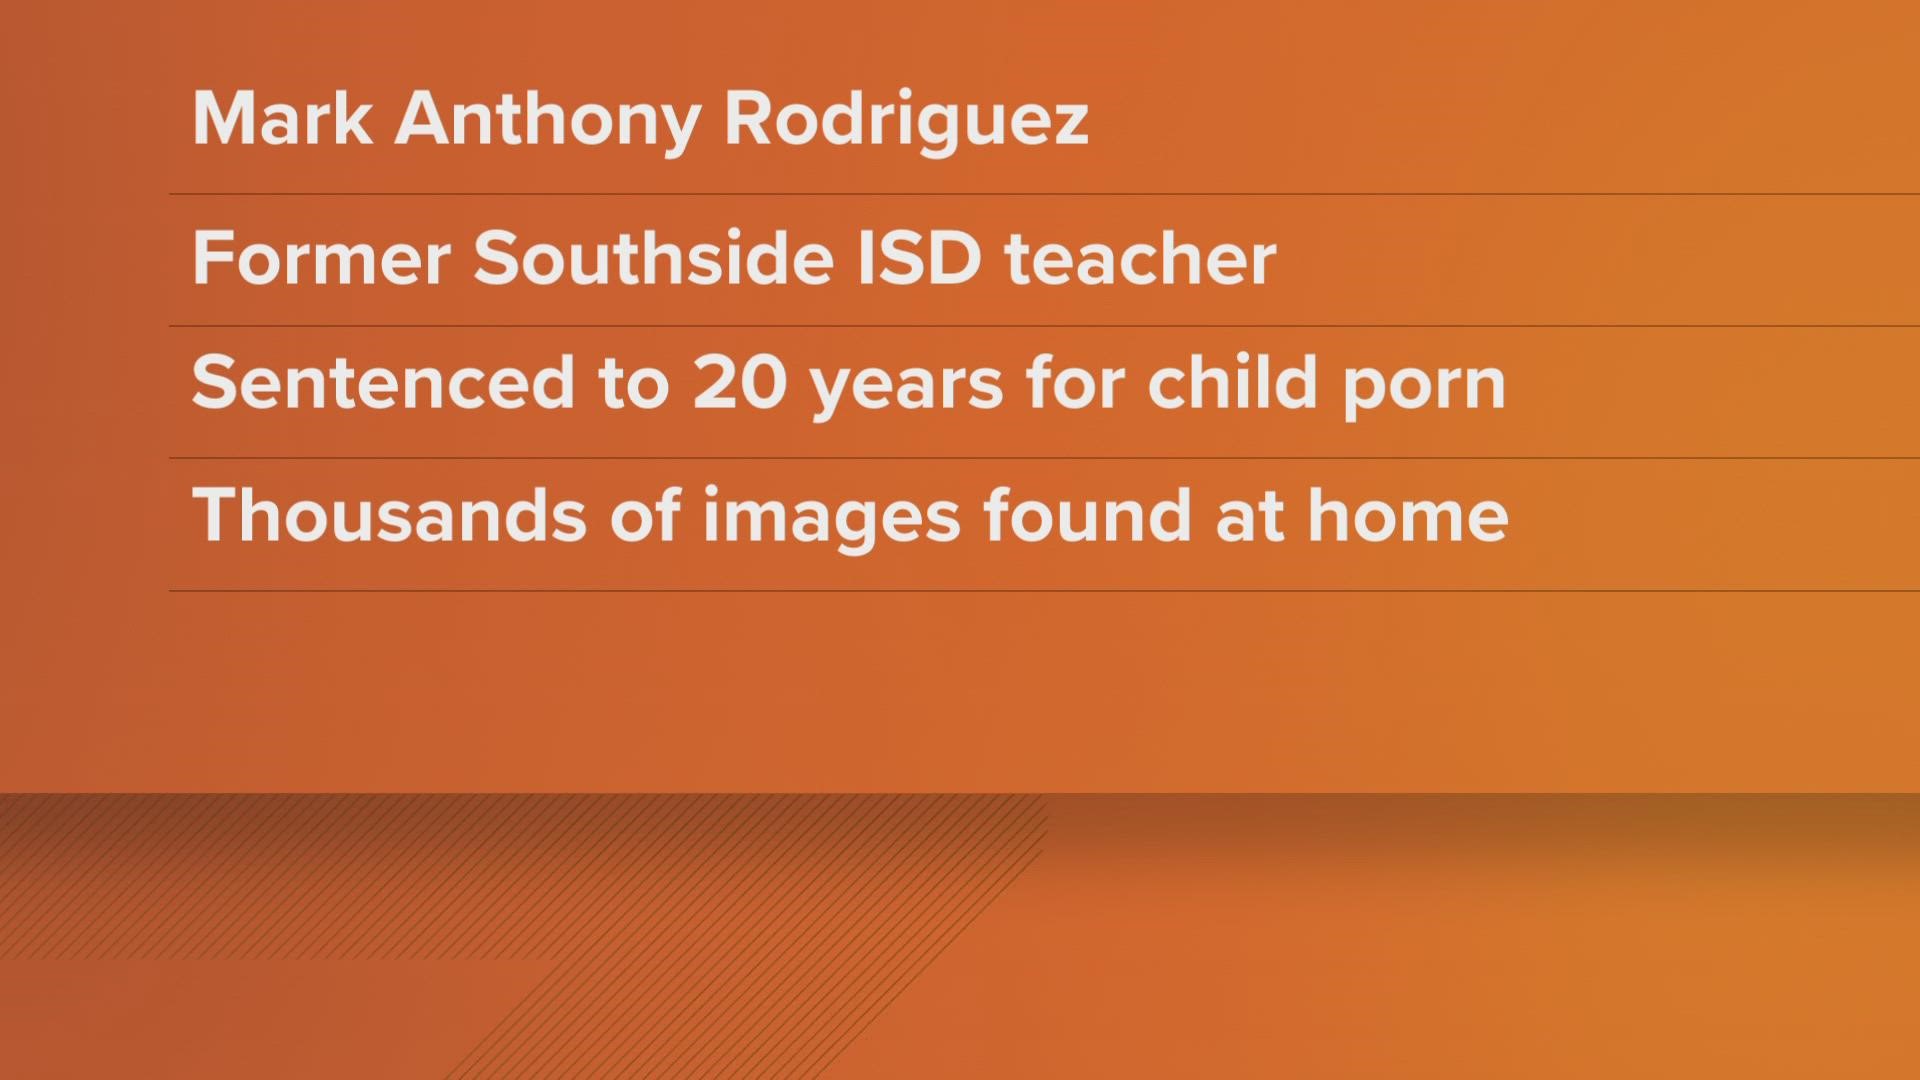 56-year-old Mark Rodriguez will spend 20 years behind bars for child pornography.